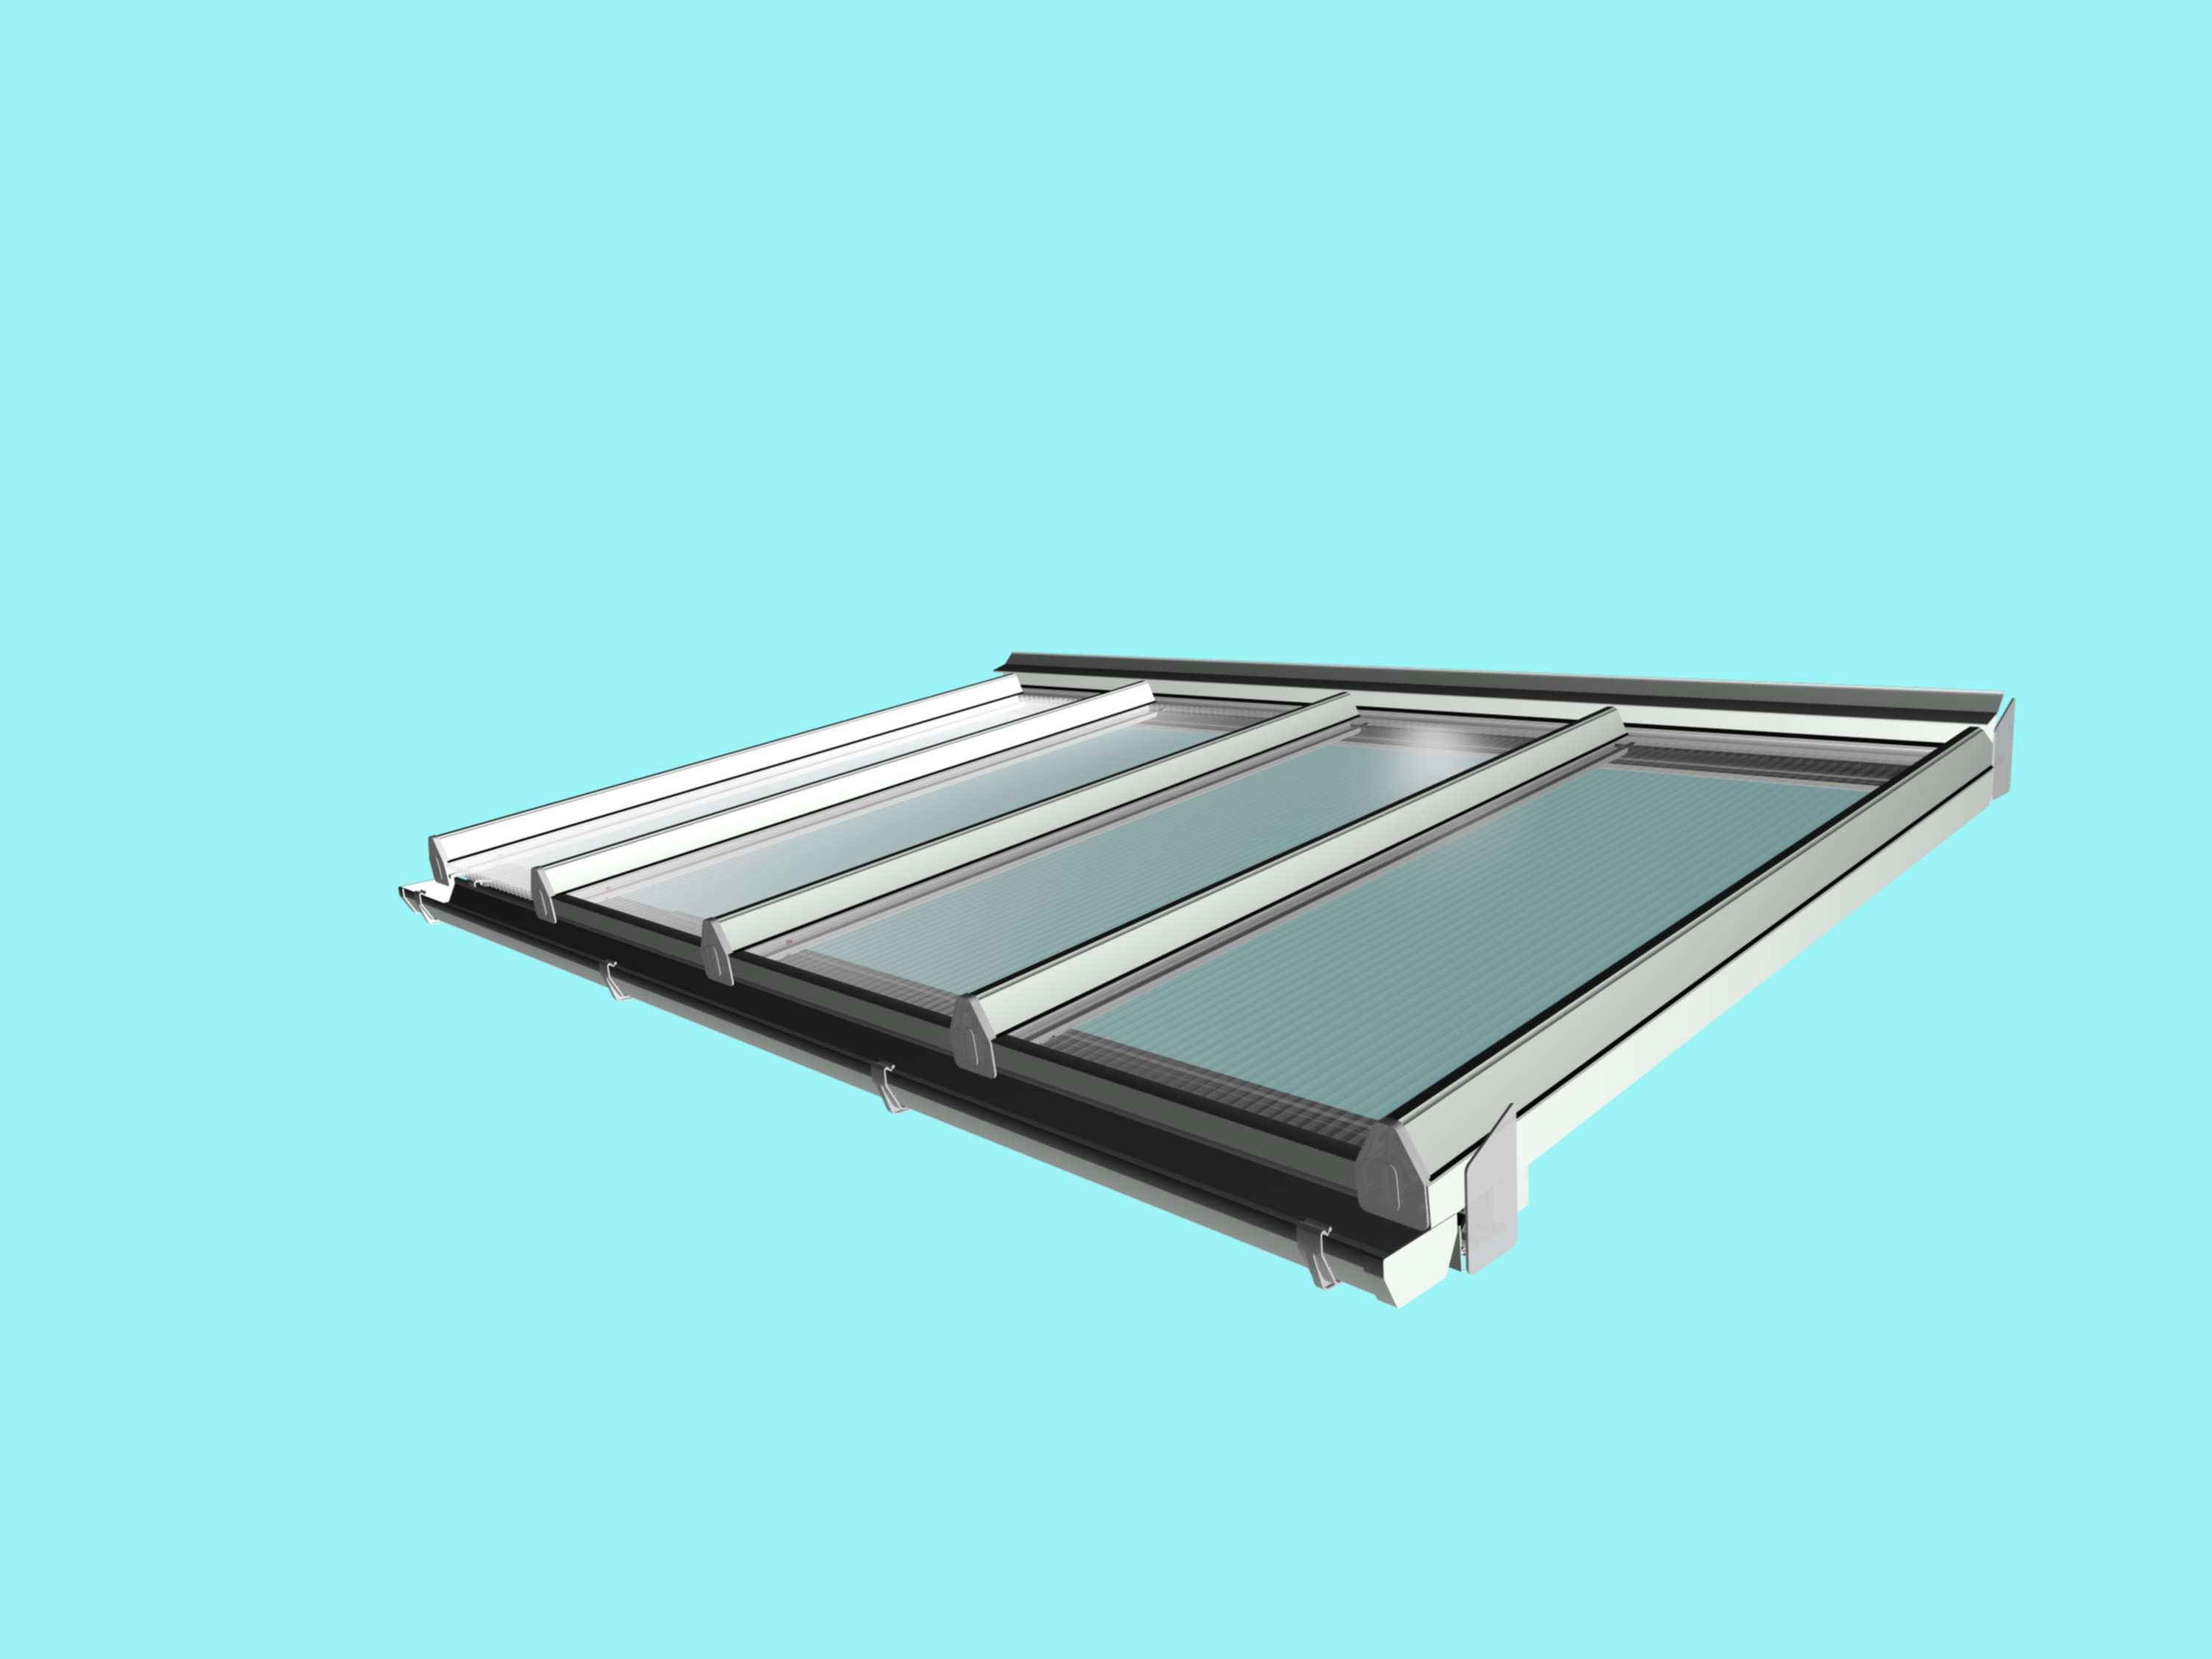 Self-Supporting DIY Conservatory Roof Kit for 16mm polycarbonate, 6.0m wide x 2.5m Projection from Omega Build